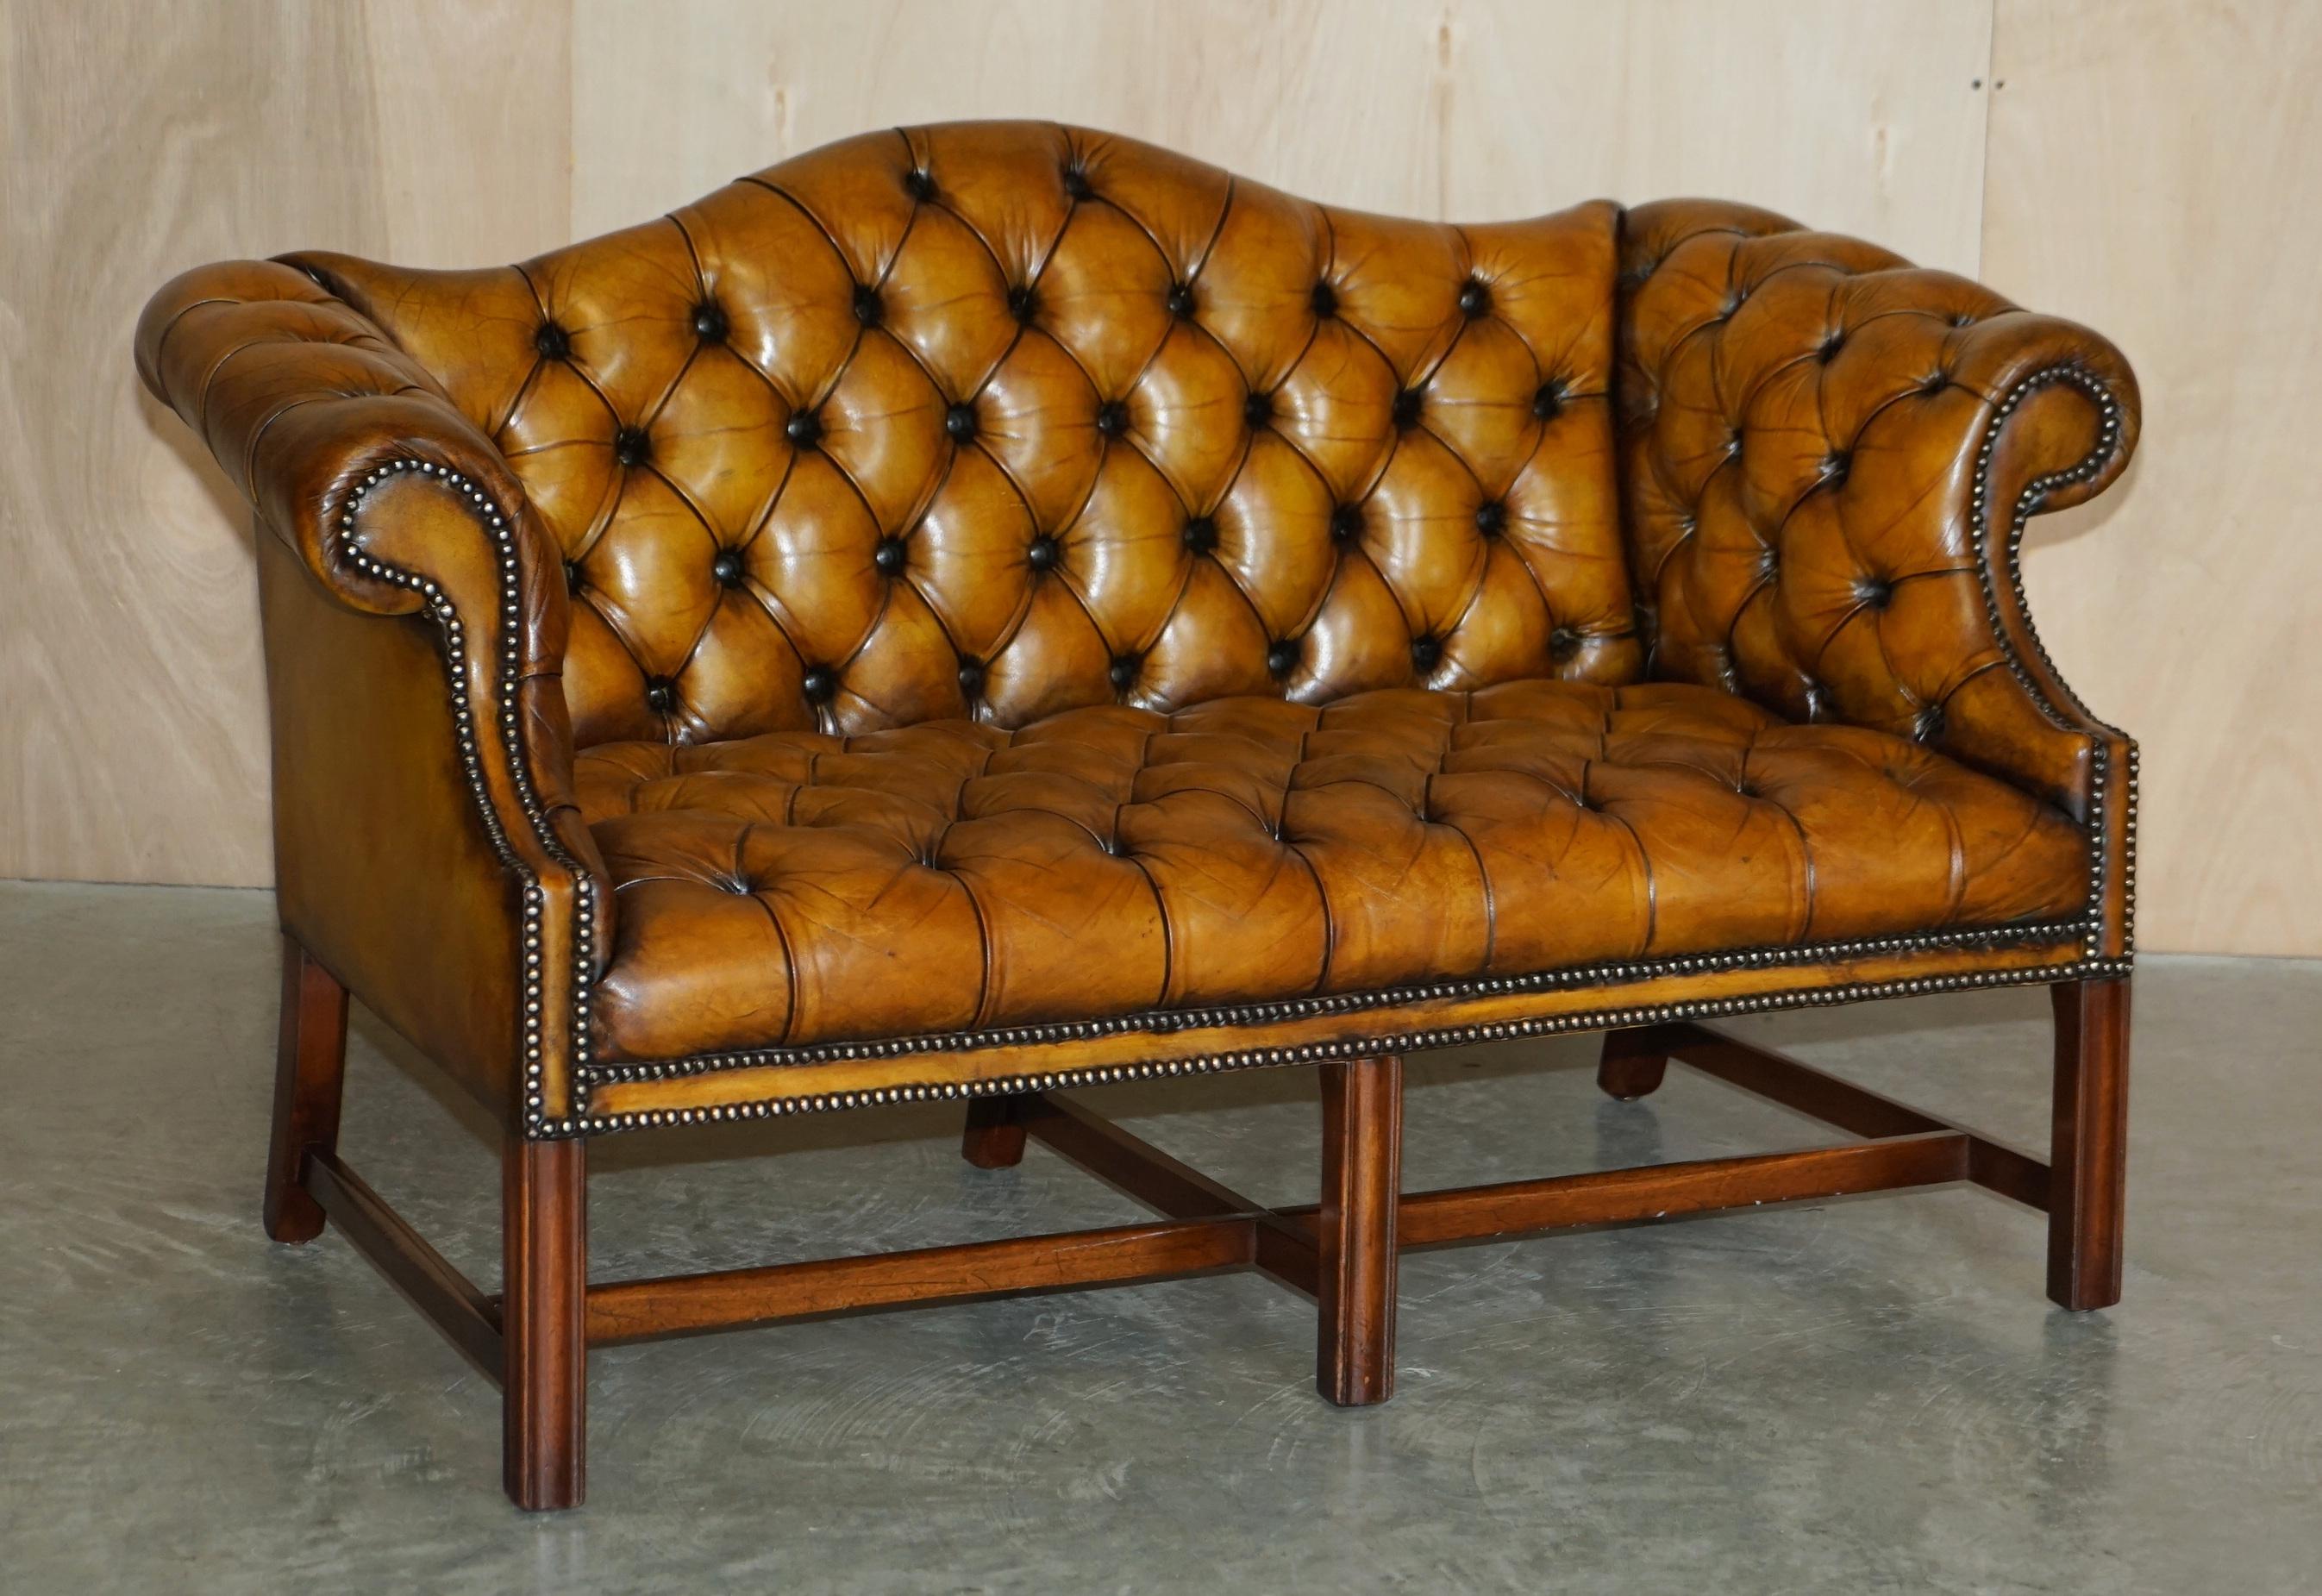 Antique Restored Brown Leather Chesterfield Library Armchairs Sofa Stool Suite For Sale 5